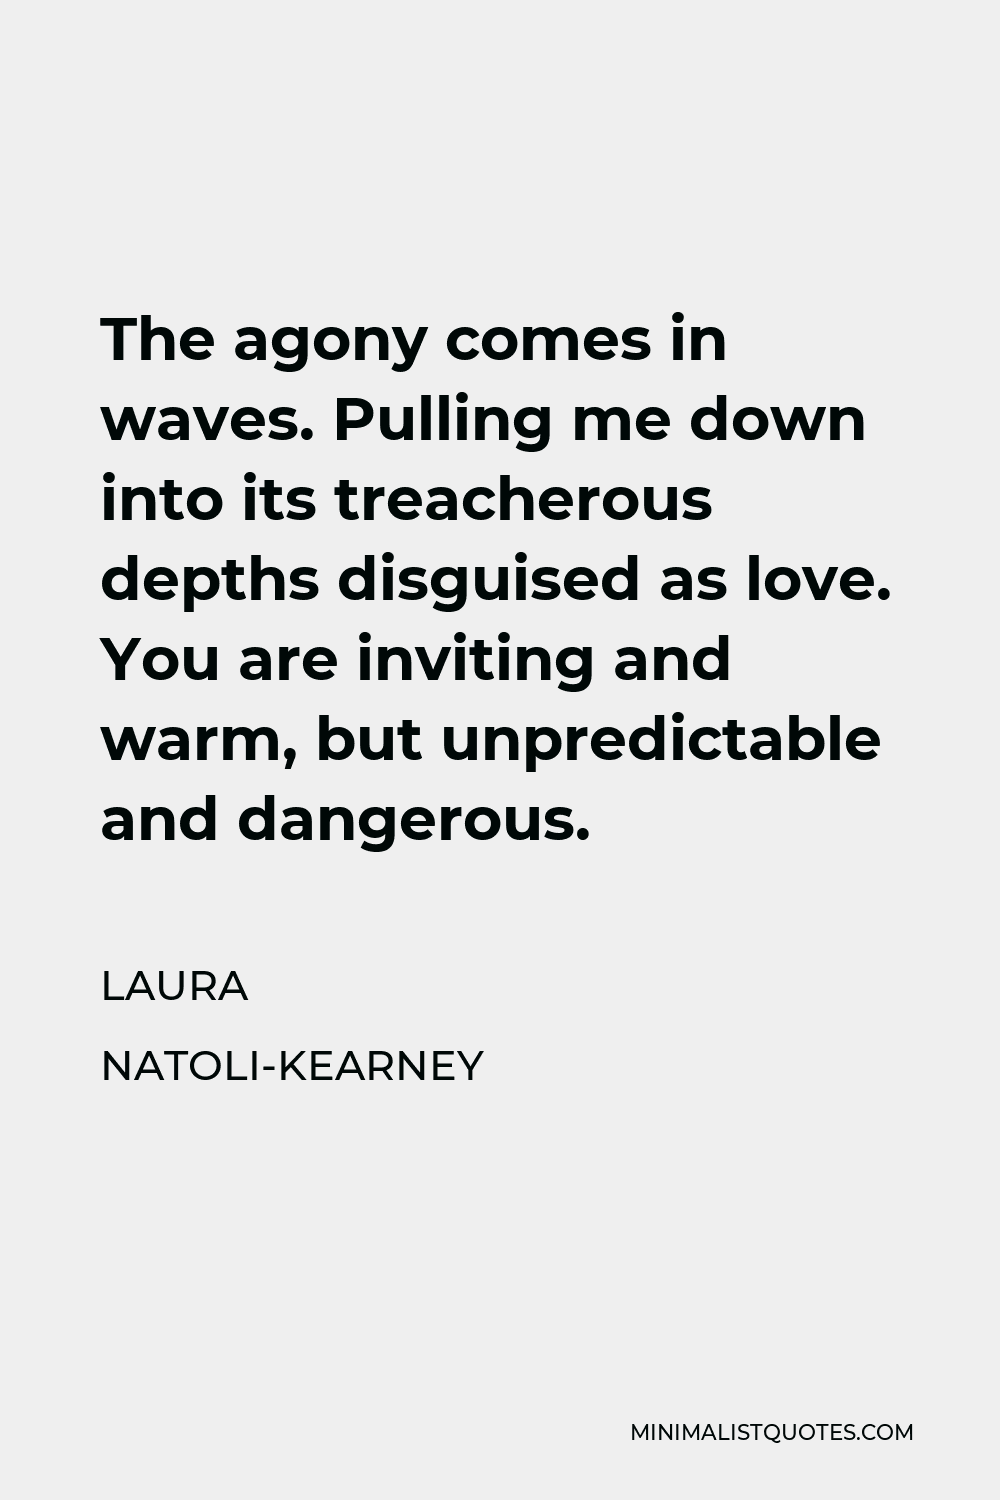 Laura Natoli-Kearney Quote - The agony comes in waves. Pulling me down into its treacherous depths disguised as love. You are inviting and warm, but unpredictable and dangerous.